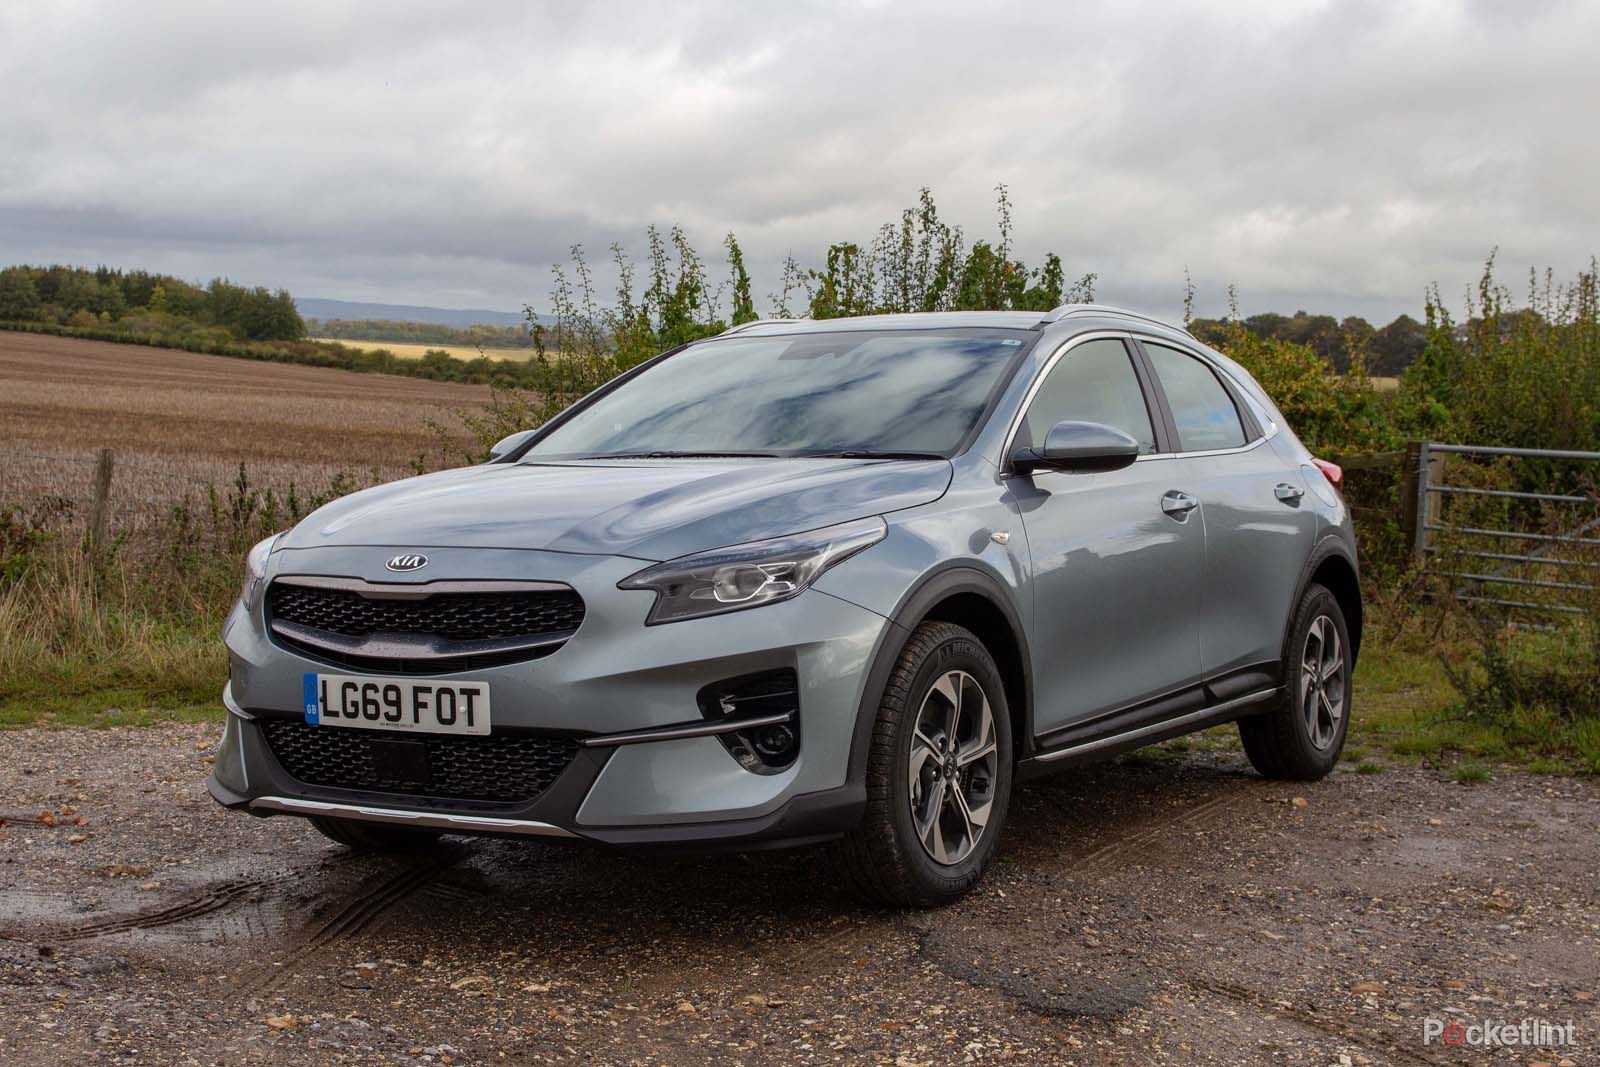 Kia XCeed review: Destined to SucCeed? - Pocket-lint